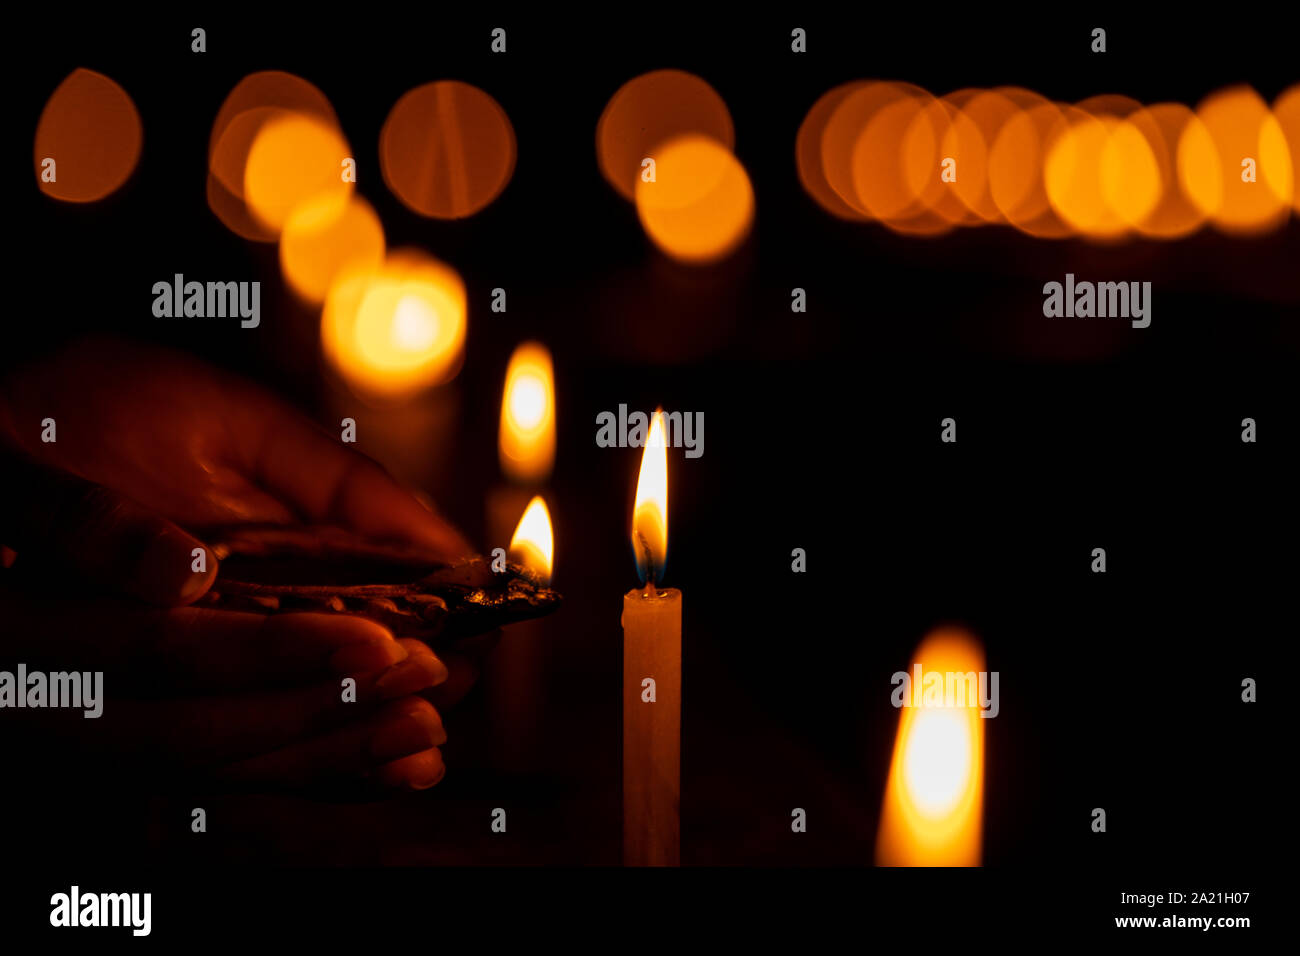 Indian housewife, female hand lighting up the candle with a diya or clay lamp or terracotta lamp. Background stock photo for diwali and other various Stock Photo